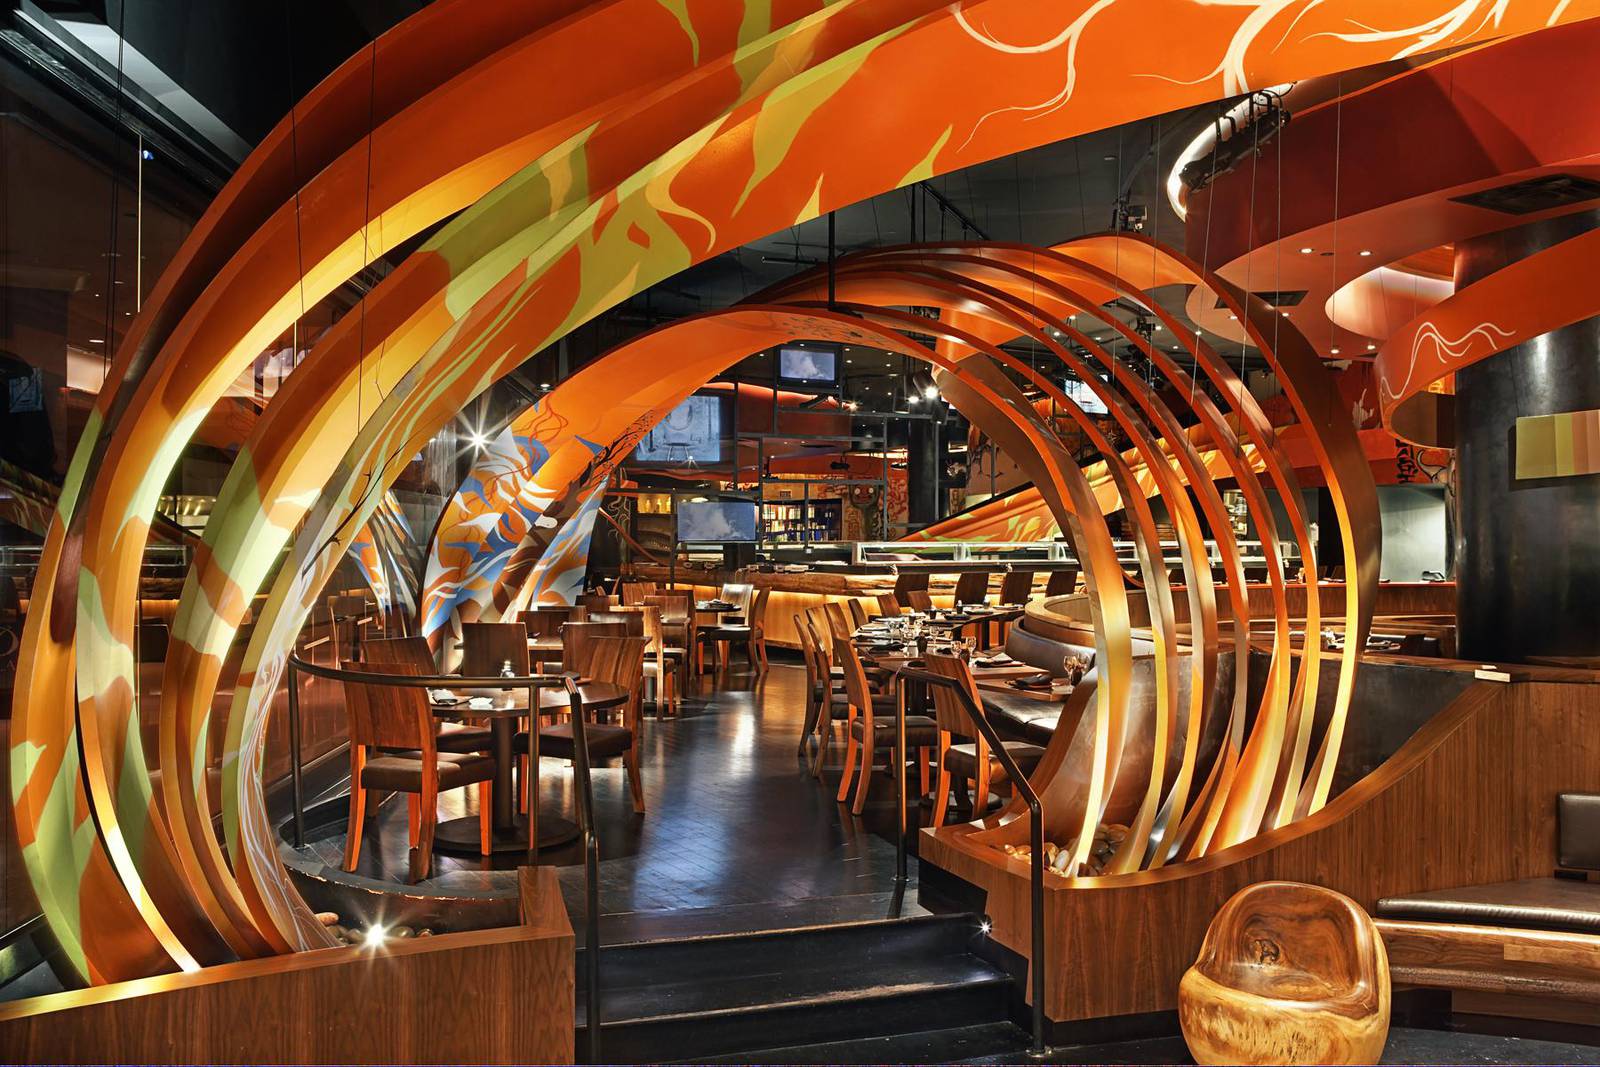 What to expect from SushiSamba when it opens in Dubai